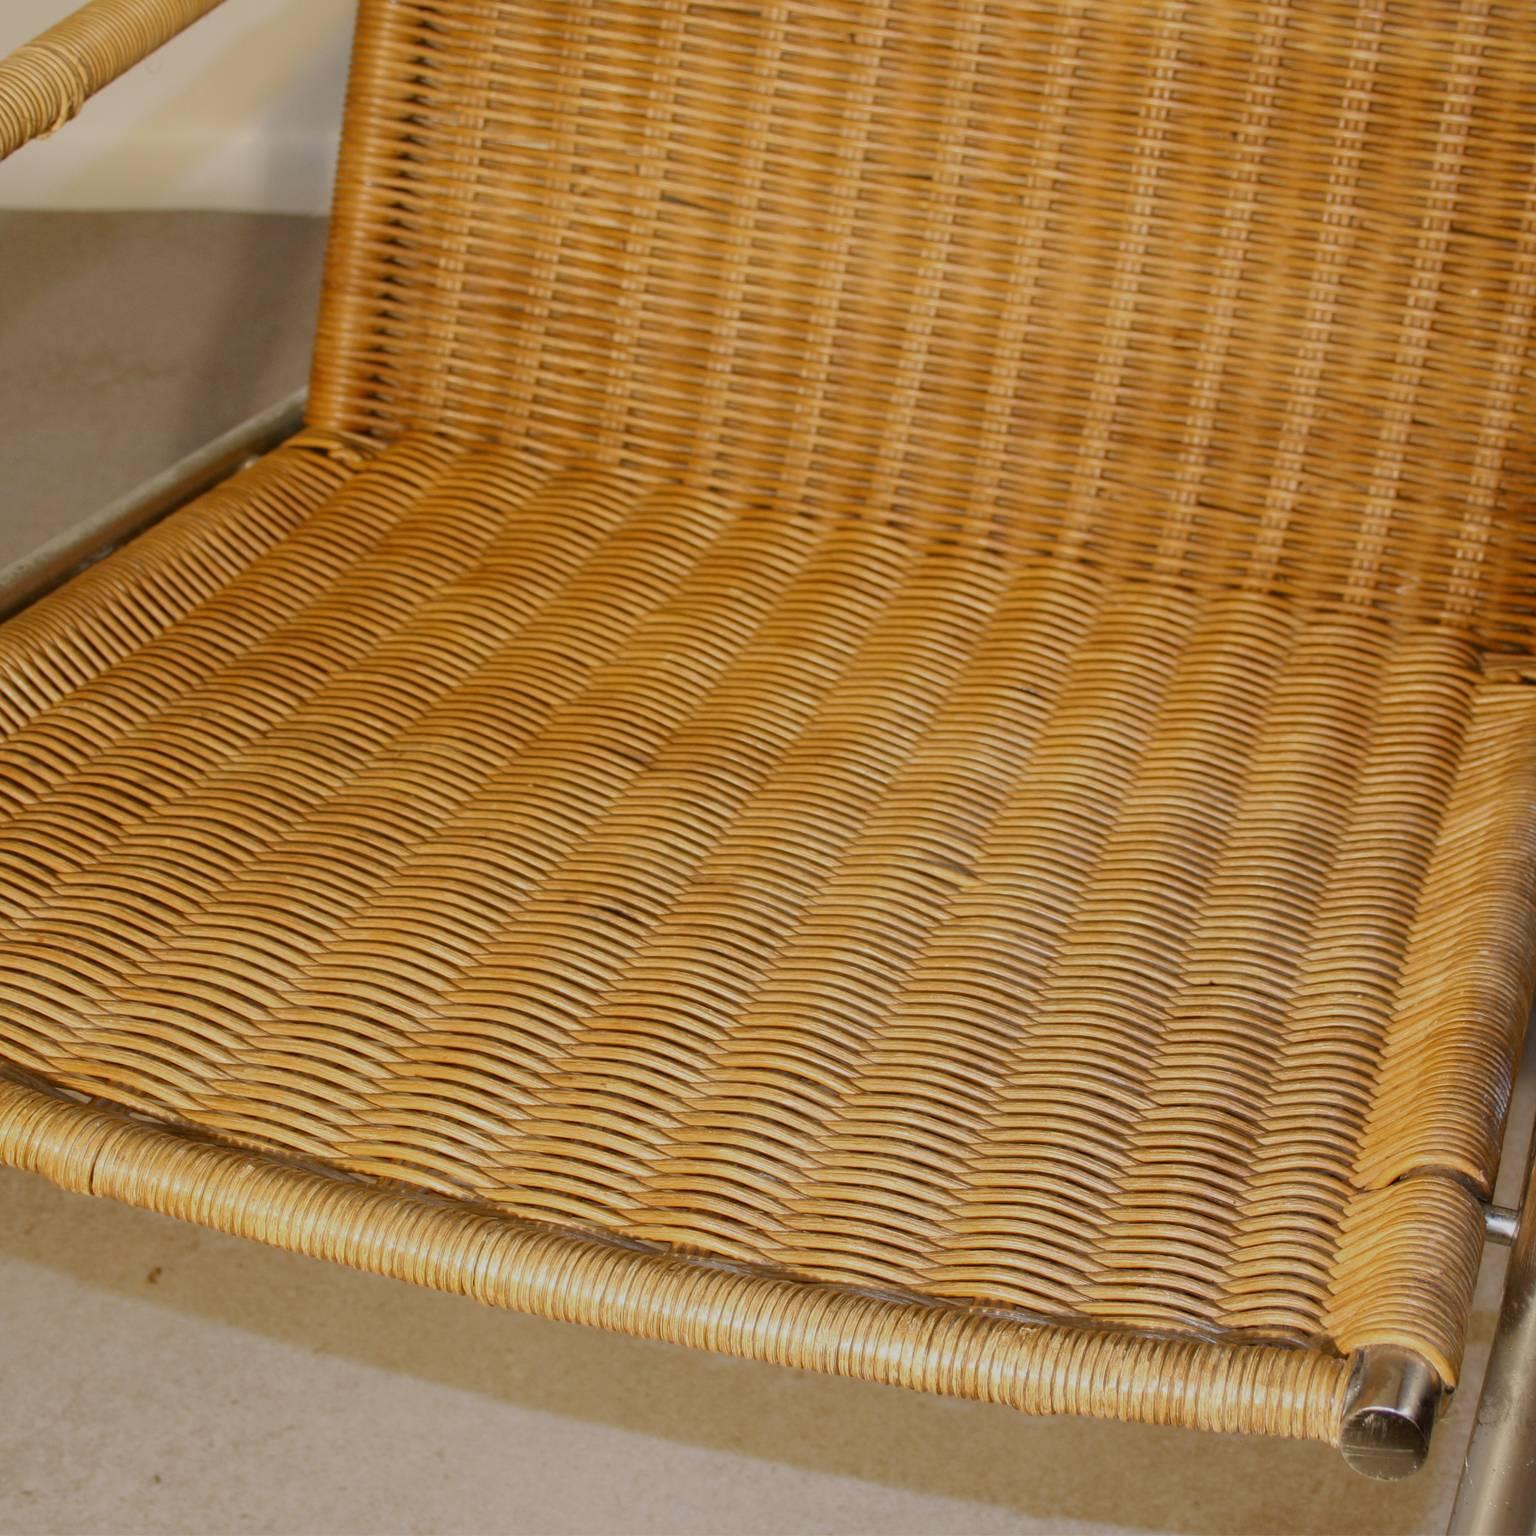 Mid-20th Century Lounge Chair “SZ41 / SZ01” or “Cato” by Martin Visser for 't Spectrum, Dutch 60s